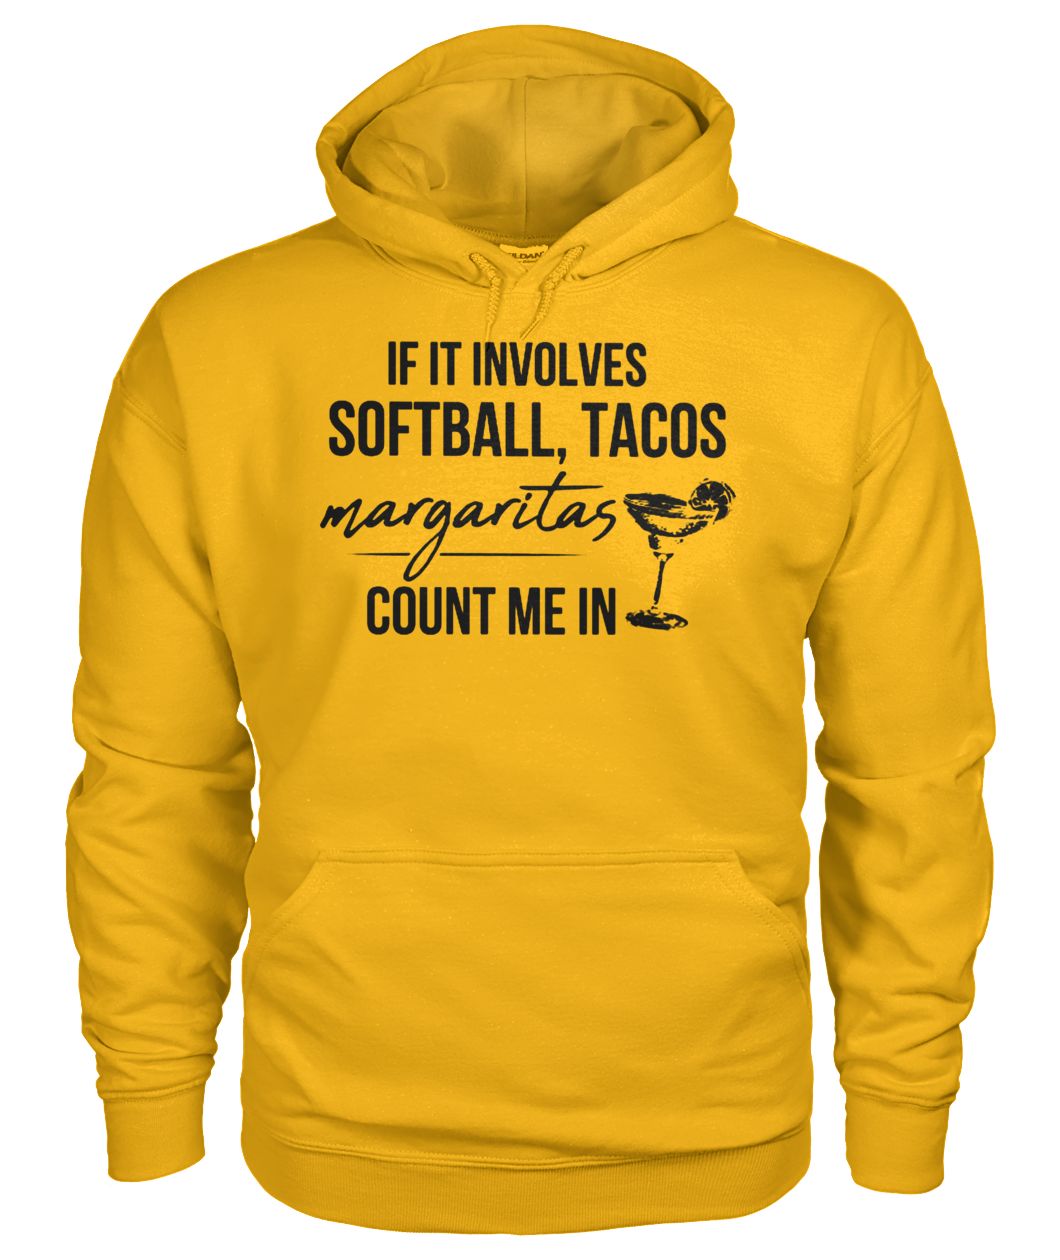 If it involves softball and tacos margaritas count me in hoodie